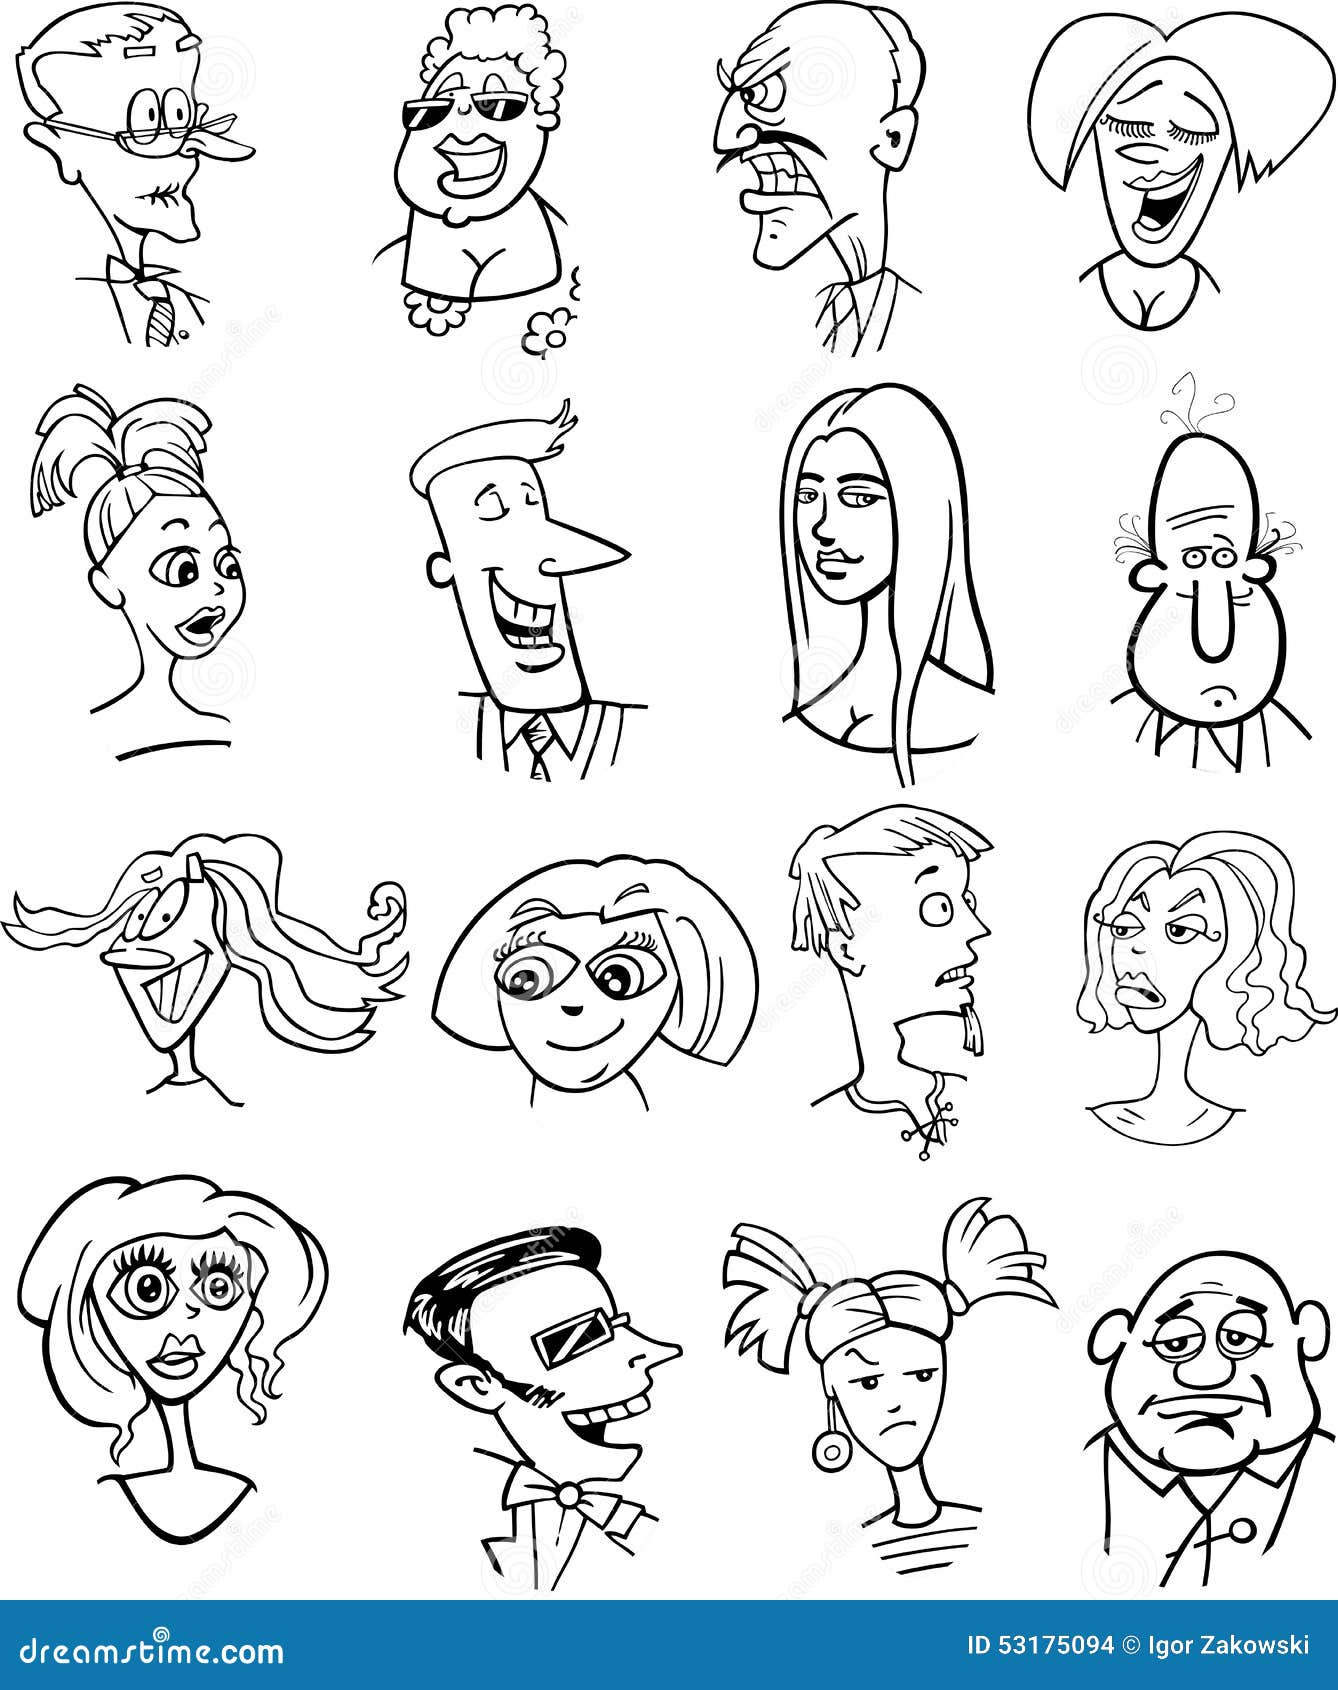 Cartoon People Characters Faces Stock Vector - Image: 53175094